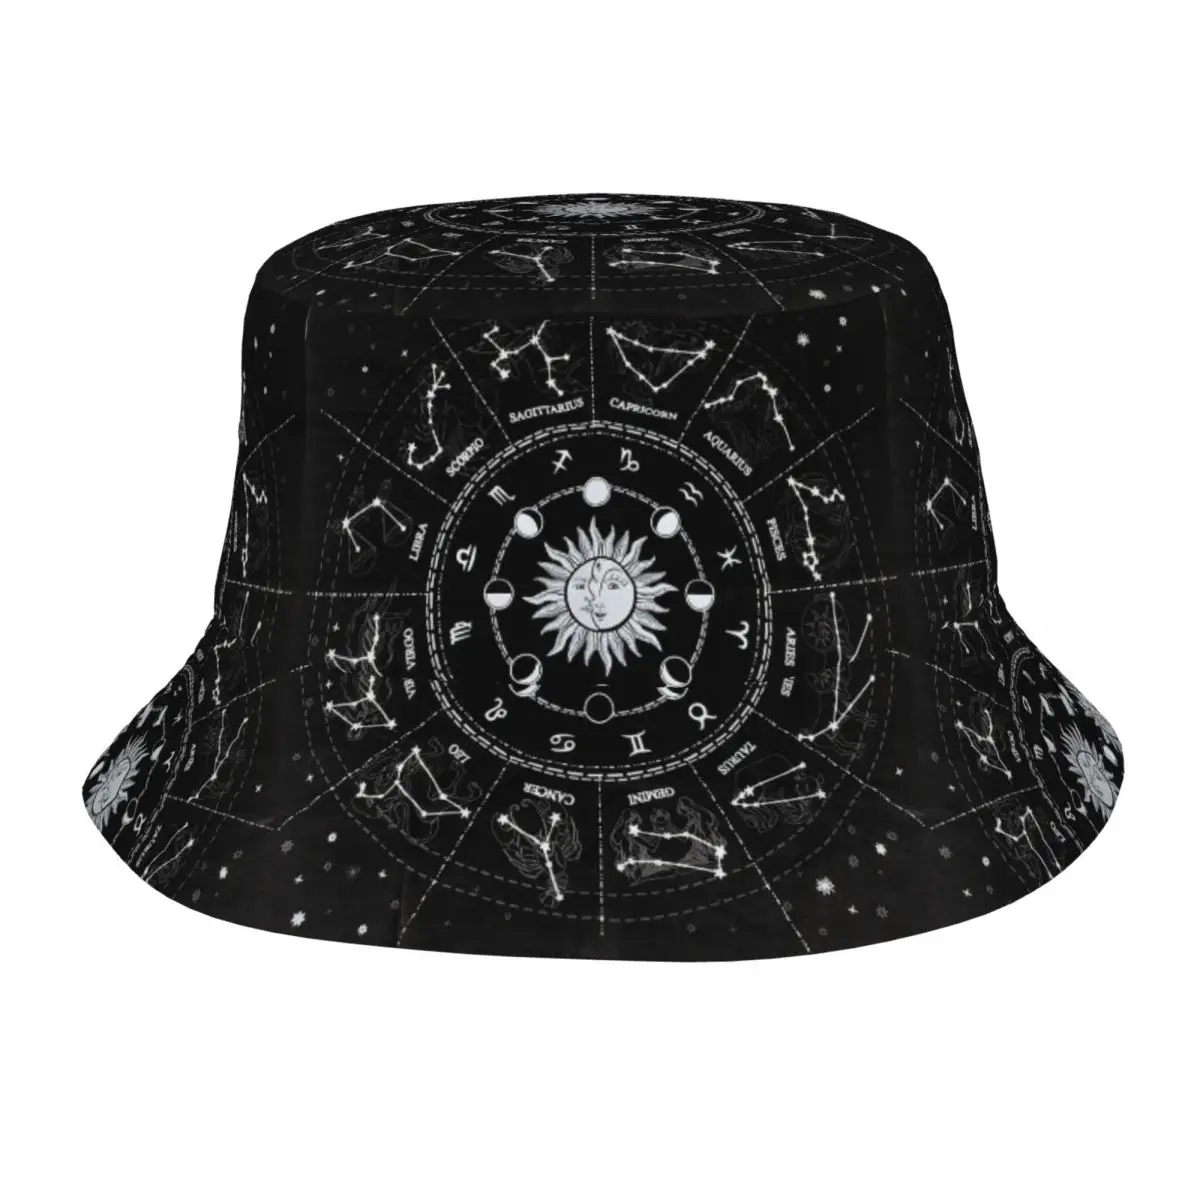 

Ouija Board Mystical Bucket Hat for Teen Vocation Constellation Sun and Moon Sun Hat Stylish for Hiking Fisherman Cap Boonie Hat